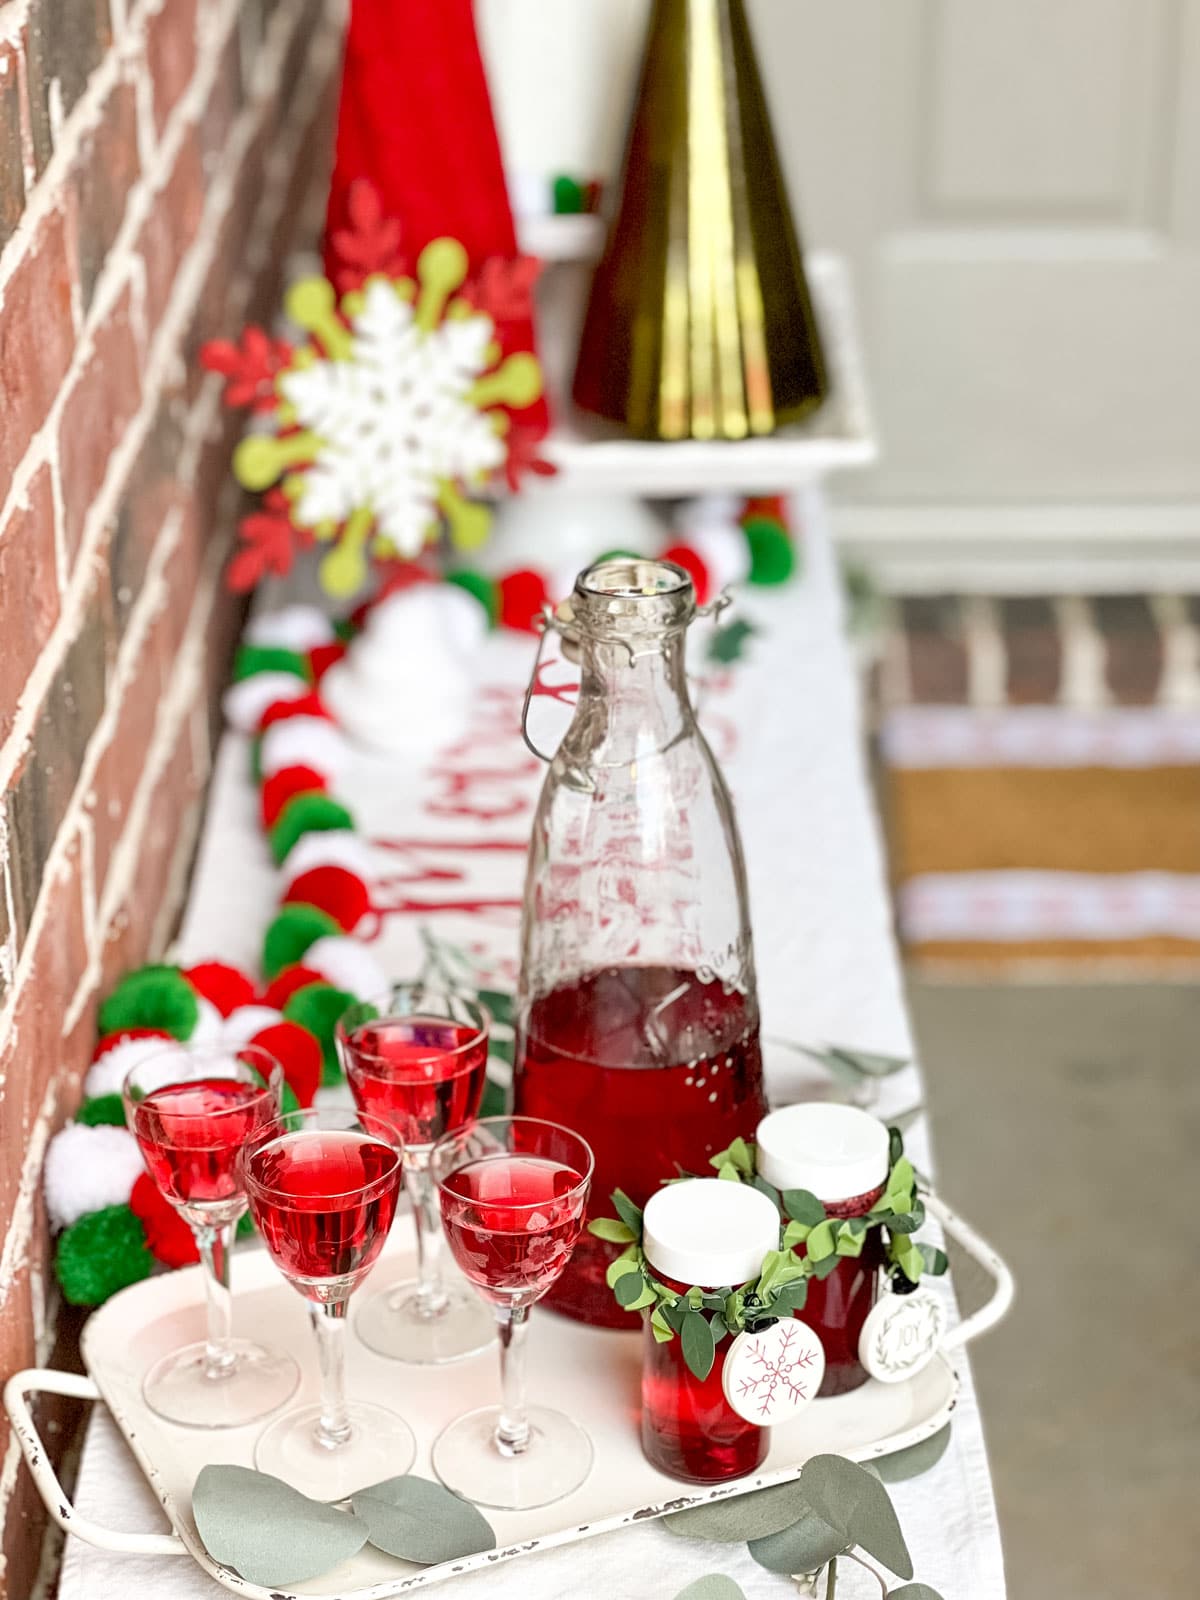 A white metal tray with handles holding 4 cordial glasses and a glass pitcher with homemade cranberry vodka. There are two small glass jars with holiday trim around the neck with small tags as a gift idea. 